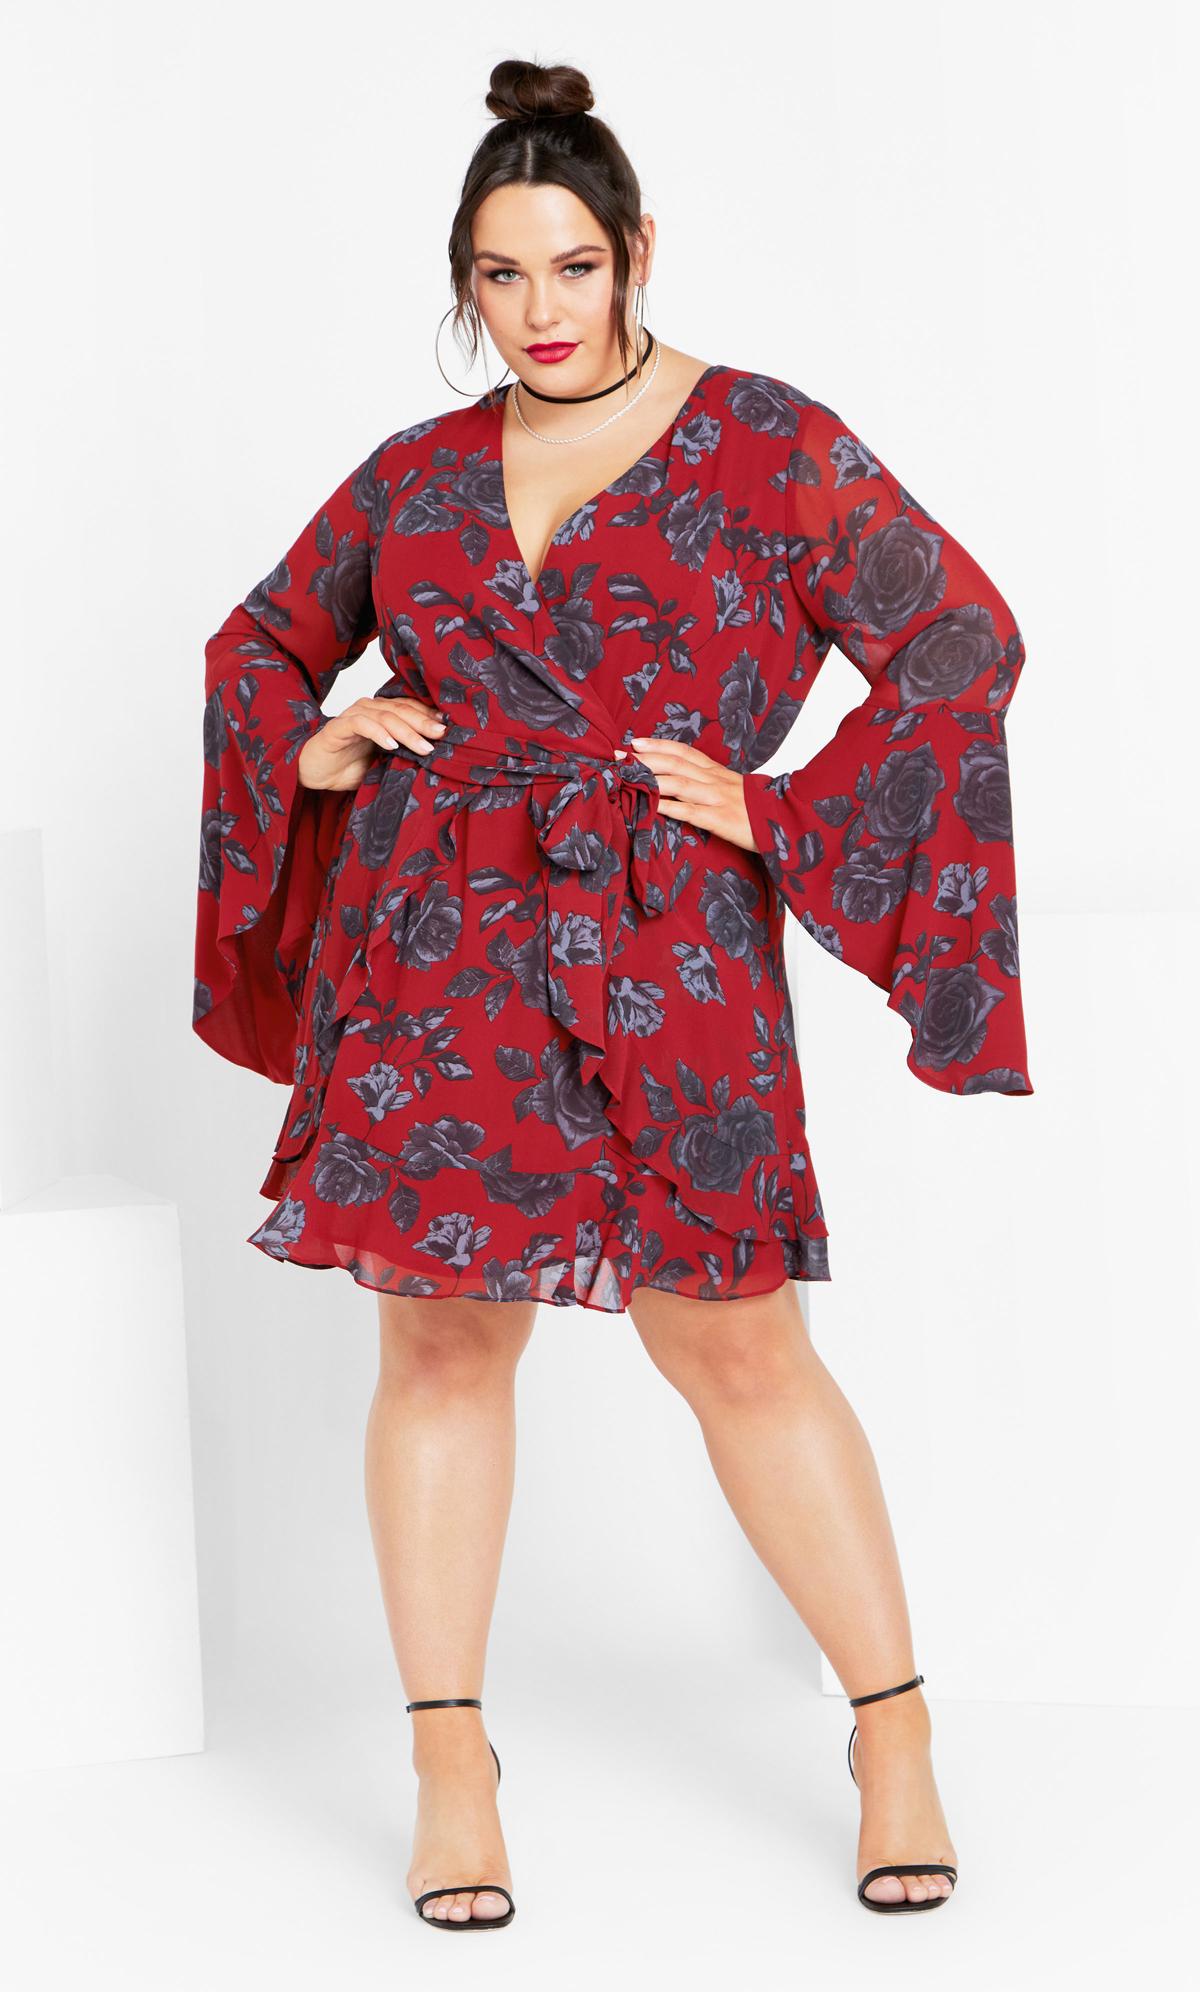 City Chic Red Rose Wrap Dress 1